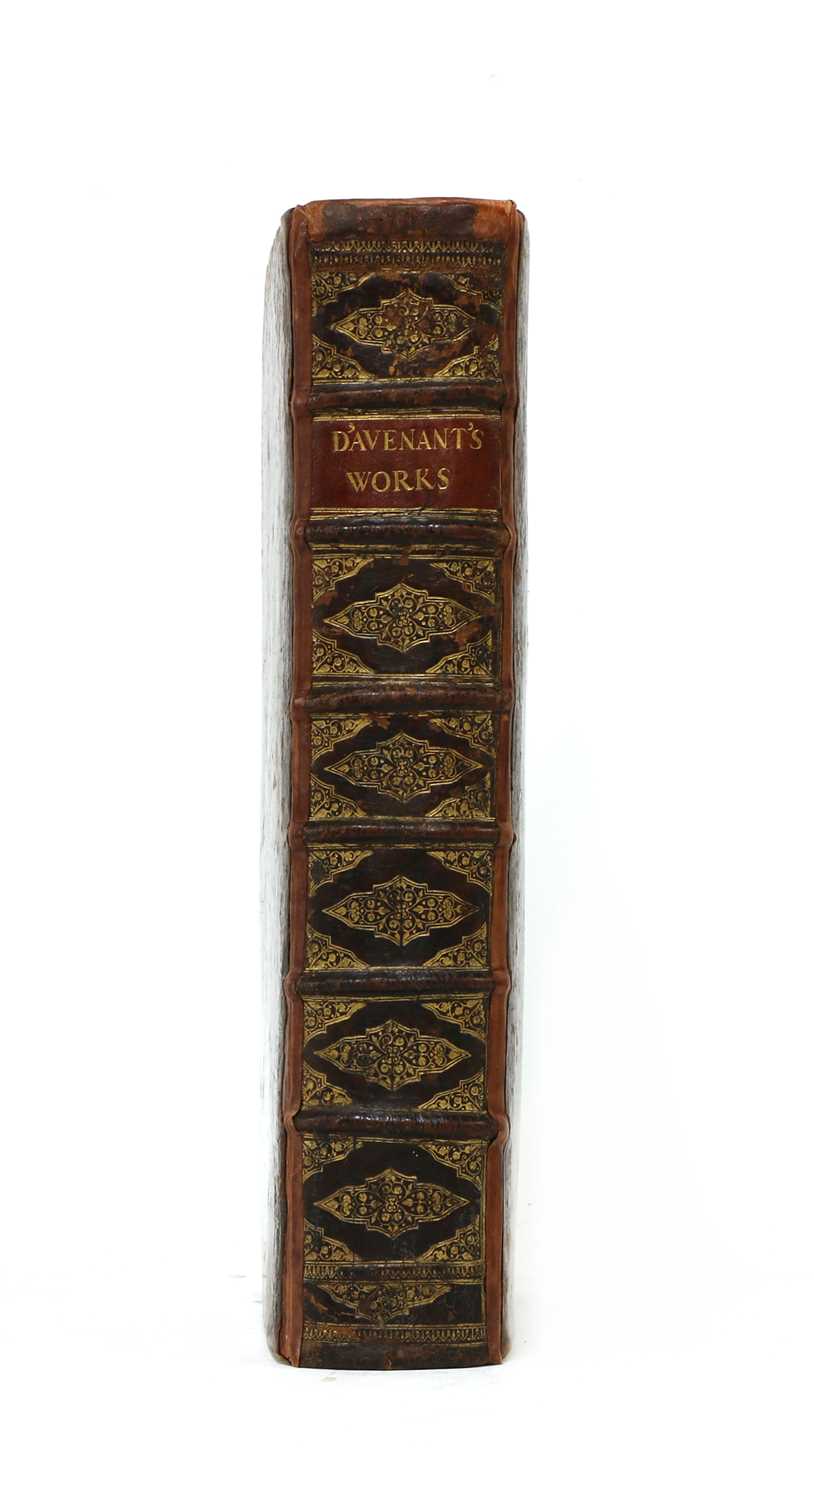 Lot 109 - Davenant, Sir William: The Works of Sir William Davenant Kt